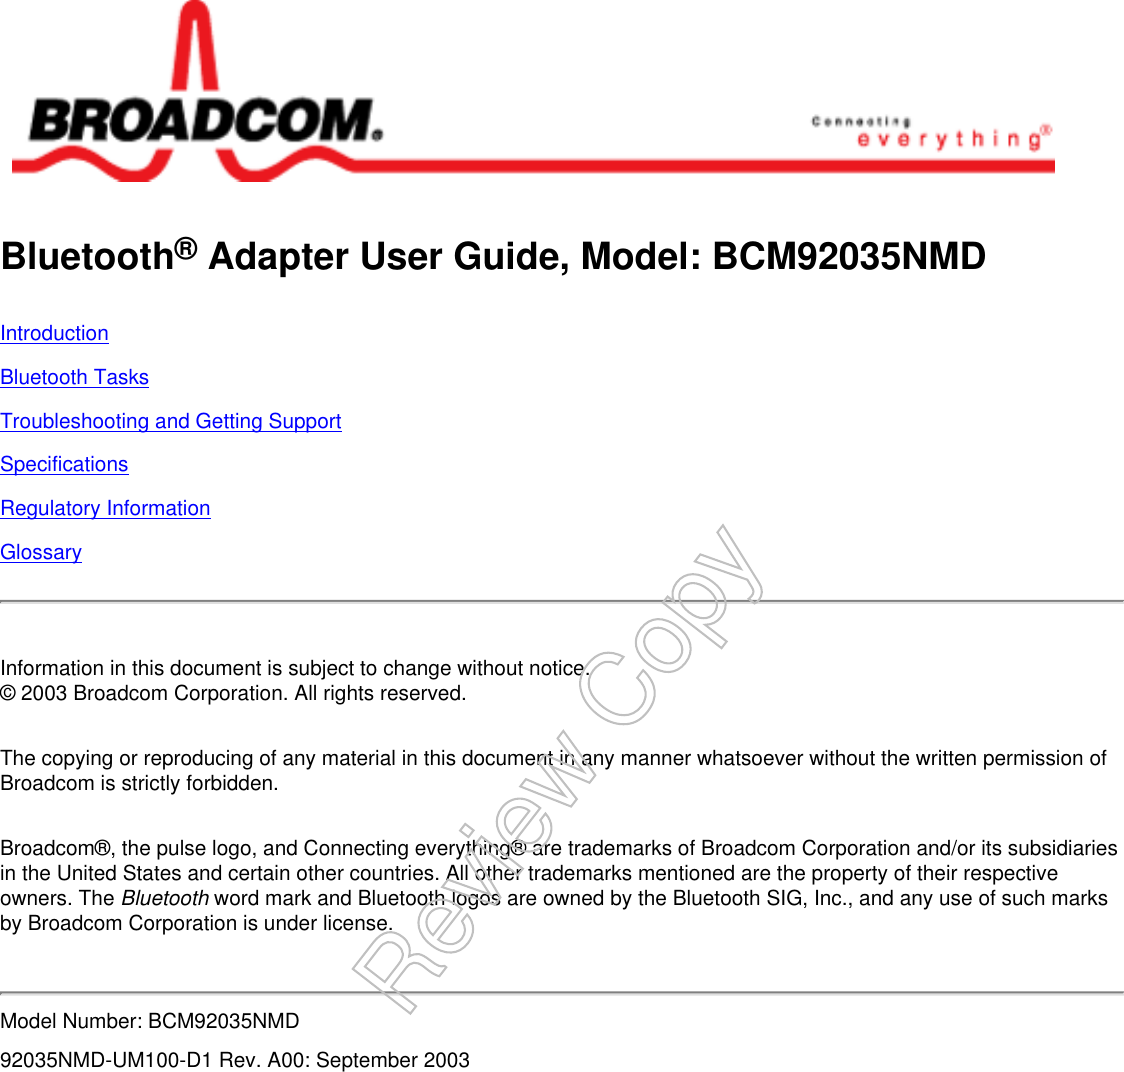 Bluetooth® Adapter User Guide, Model: BCM92035NMDIntroductionBluetooth TasksTroubleshooting and Getting SupportSpecificationsRegulatory InformationGlossaryInformation in this document is subject to change without notice.© 2003 Broadcom Corporation. All rights reserved.The copying or reproducing of any material in this document in any manner whatsoever without the written permission of Broadcom is strictly forbidden.Broadcom®, the pulse logo, and Connecting everything® are trademarks of Broadcom Corporation and/or its subsidiaries in the United States and certain other countries. All other trademarks mentioned are the property of their respective owners. The Bluetooth word mark and Bluetooth logos are owned by the Bluetooth SIG, Inc., and any use of such marks by Broadcom Corporation is under license.Model Number: BCM92035NMD92035NMD-UM100-D1 Rev. A00: September 2003Review Copy